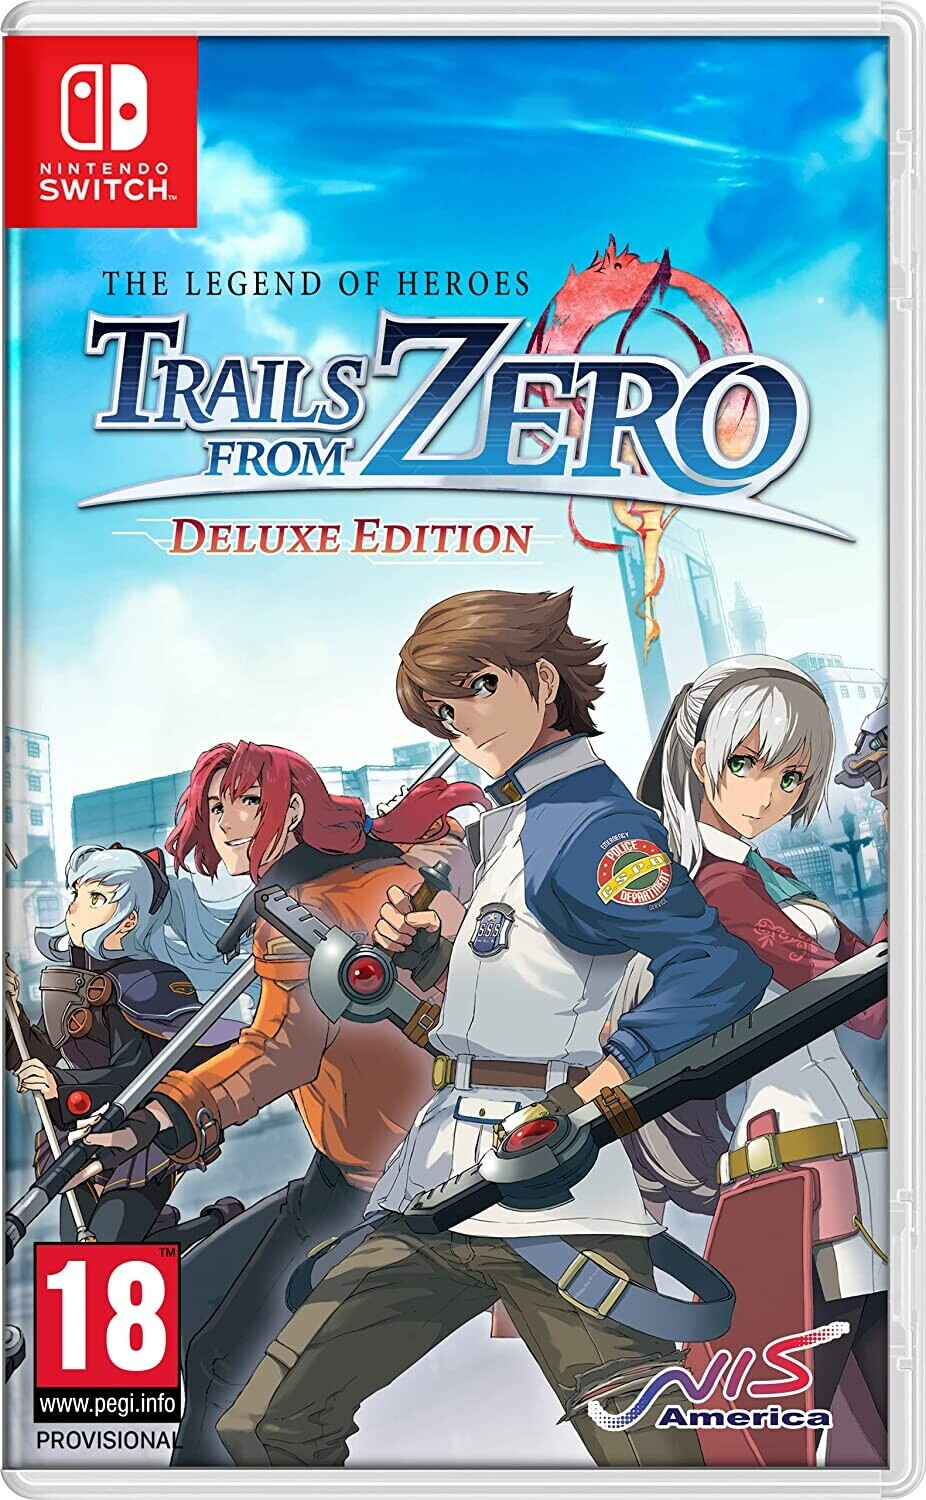 Photos - Game Nihon Falcom The Legend of Heroes: Trails from Zero - Deluxe Edition (Swit